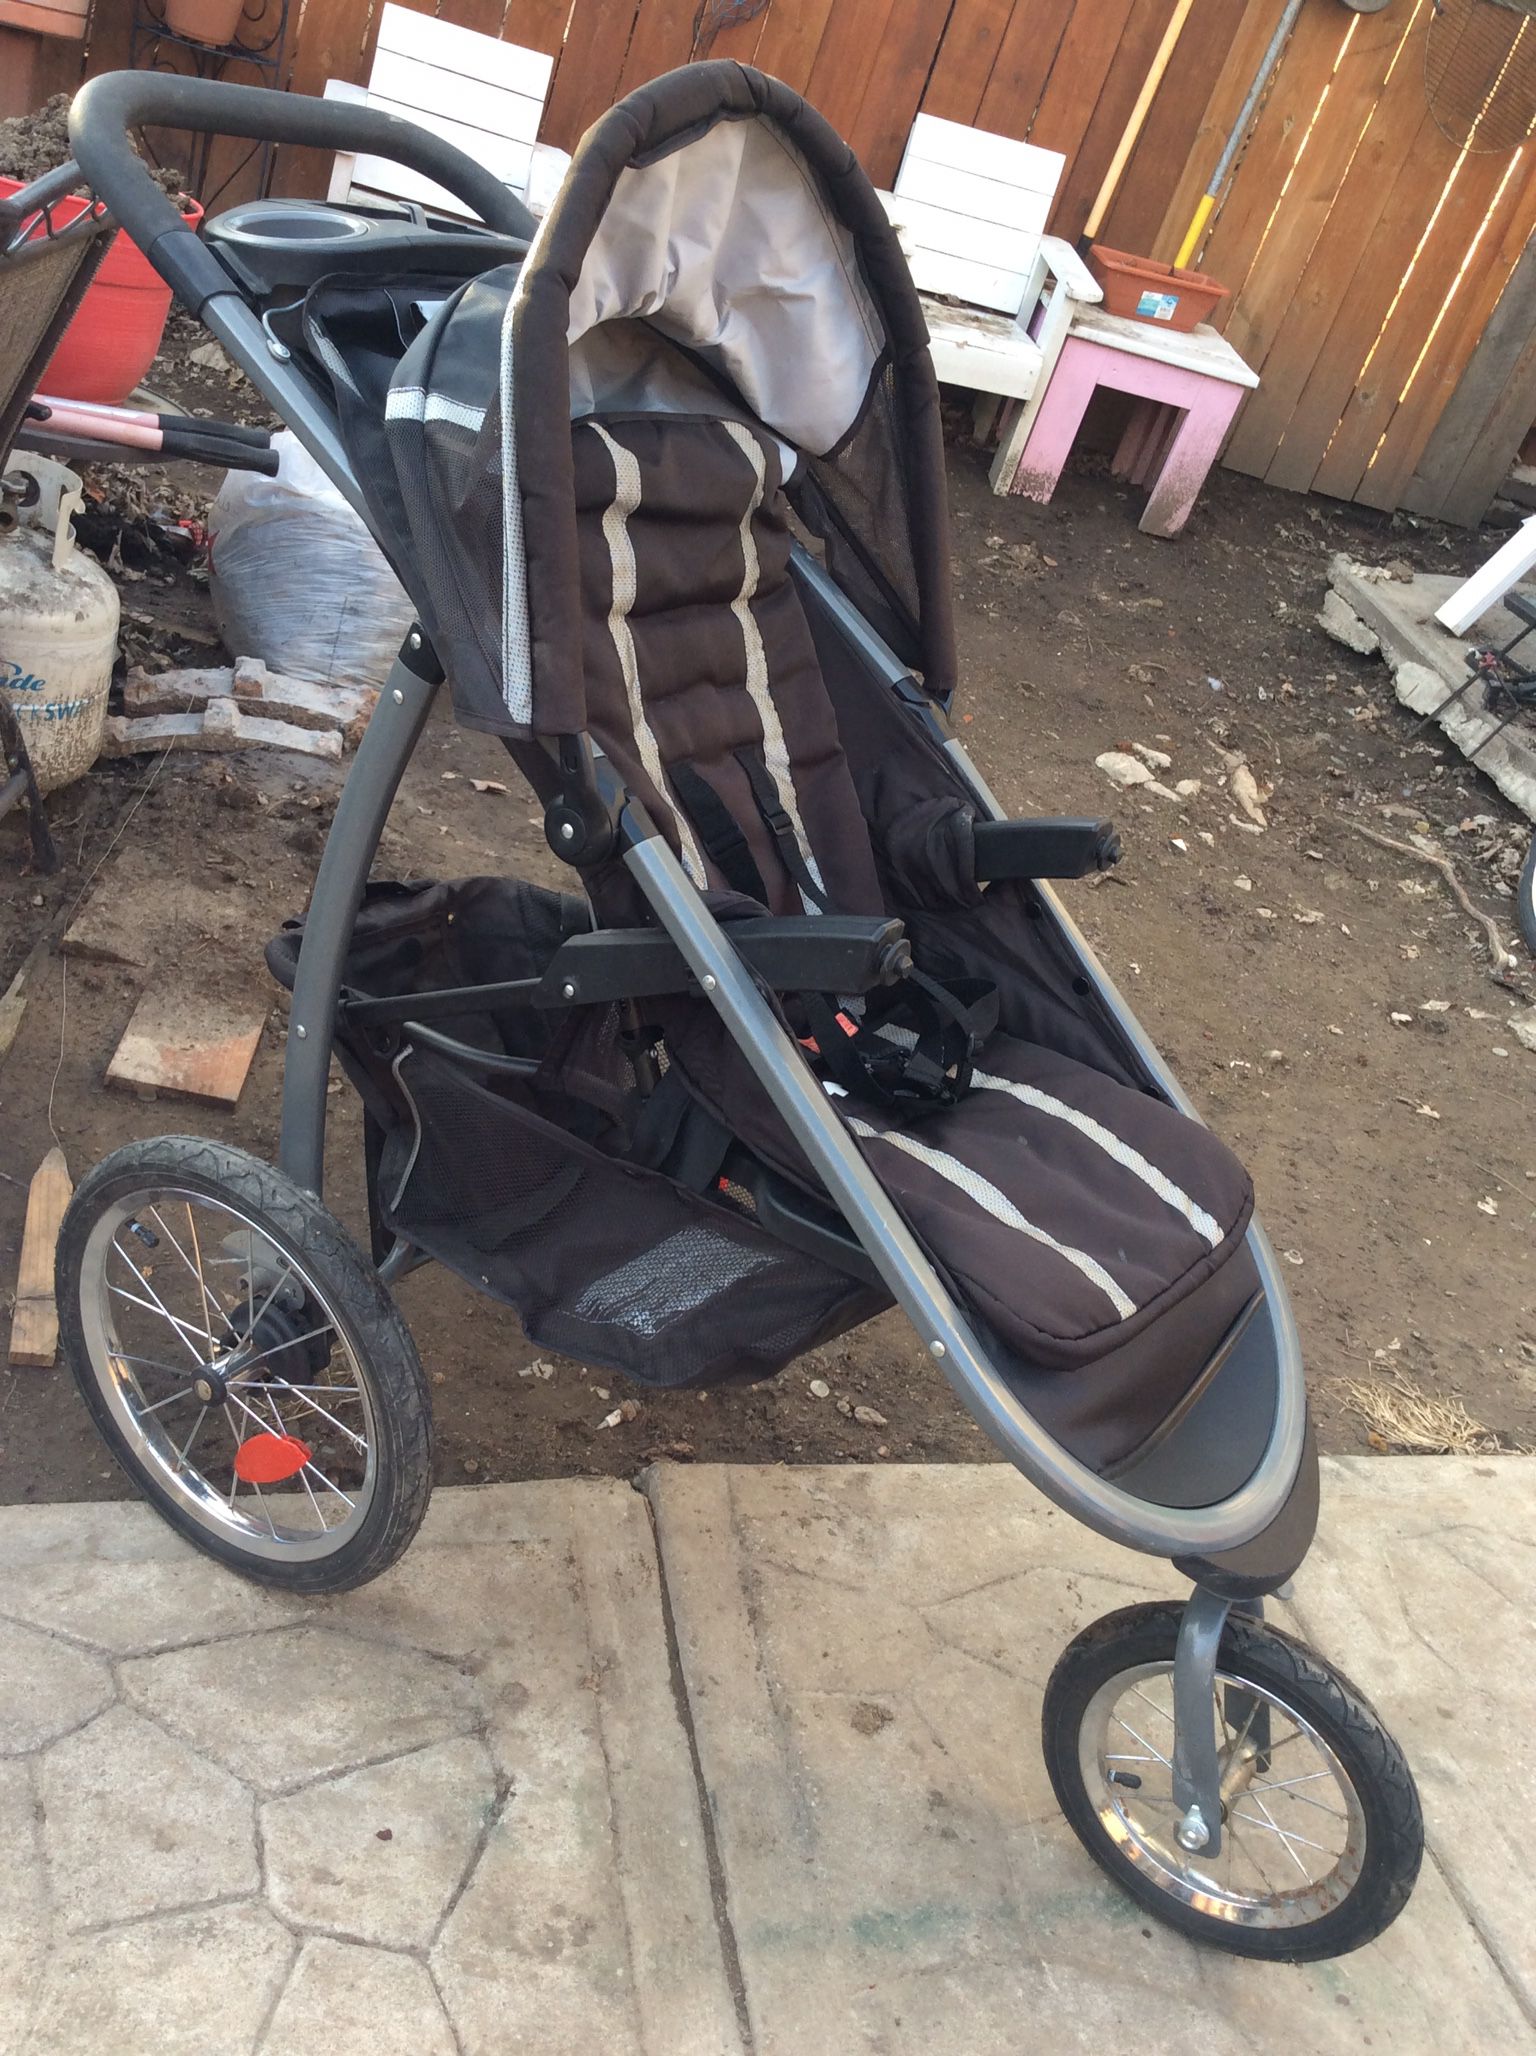 Stroller Need The The Thing  Goes On Front 